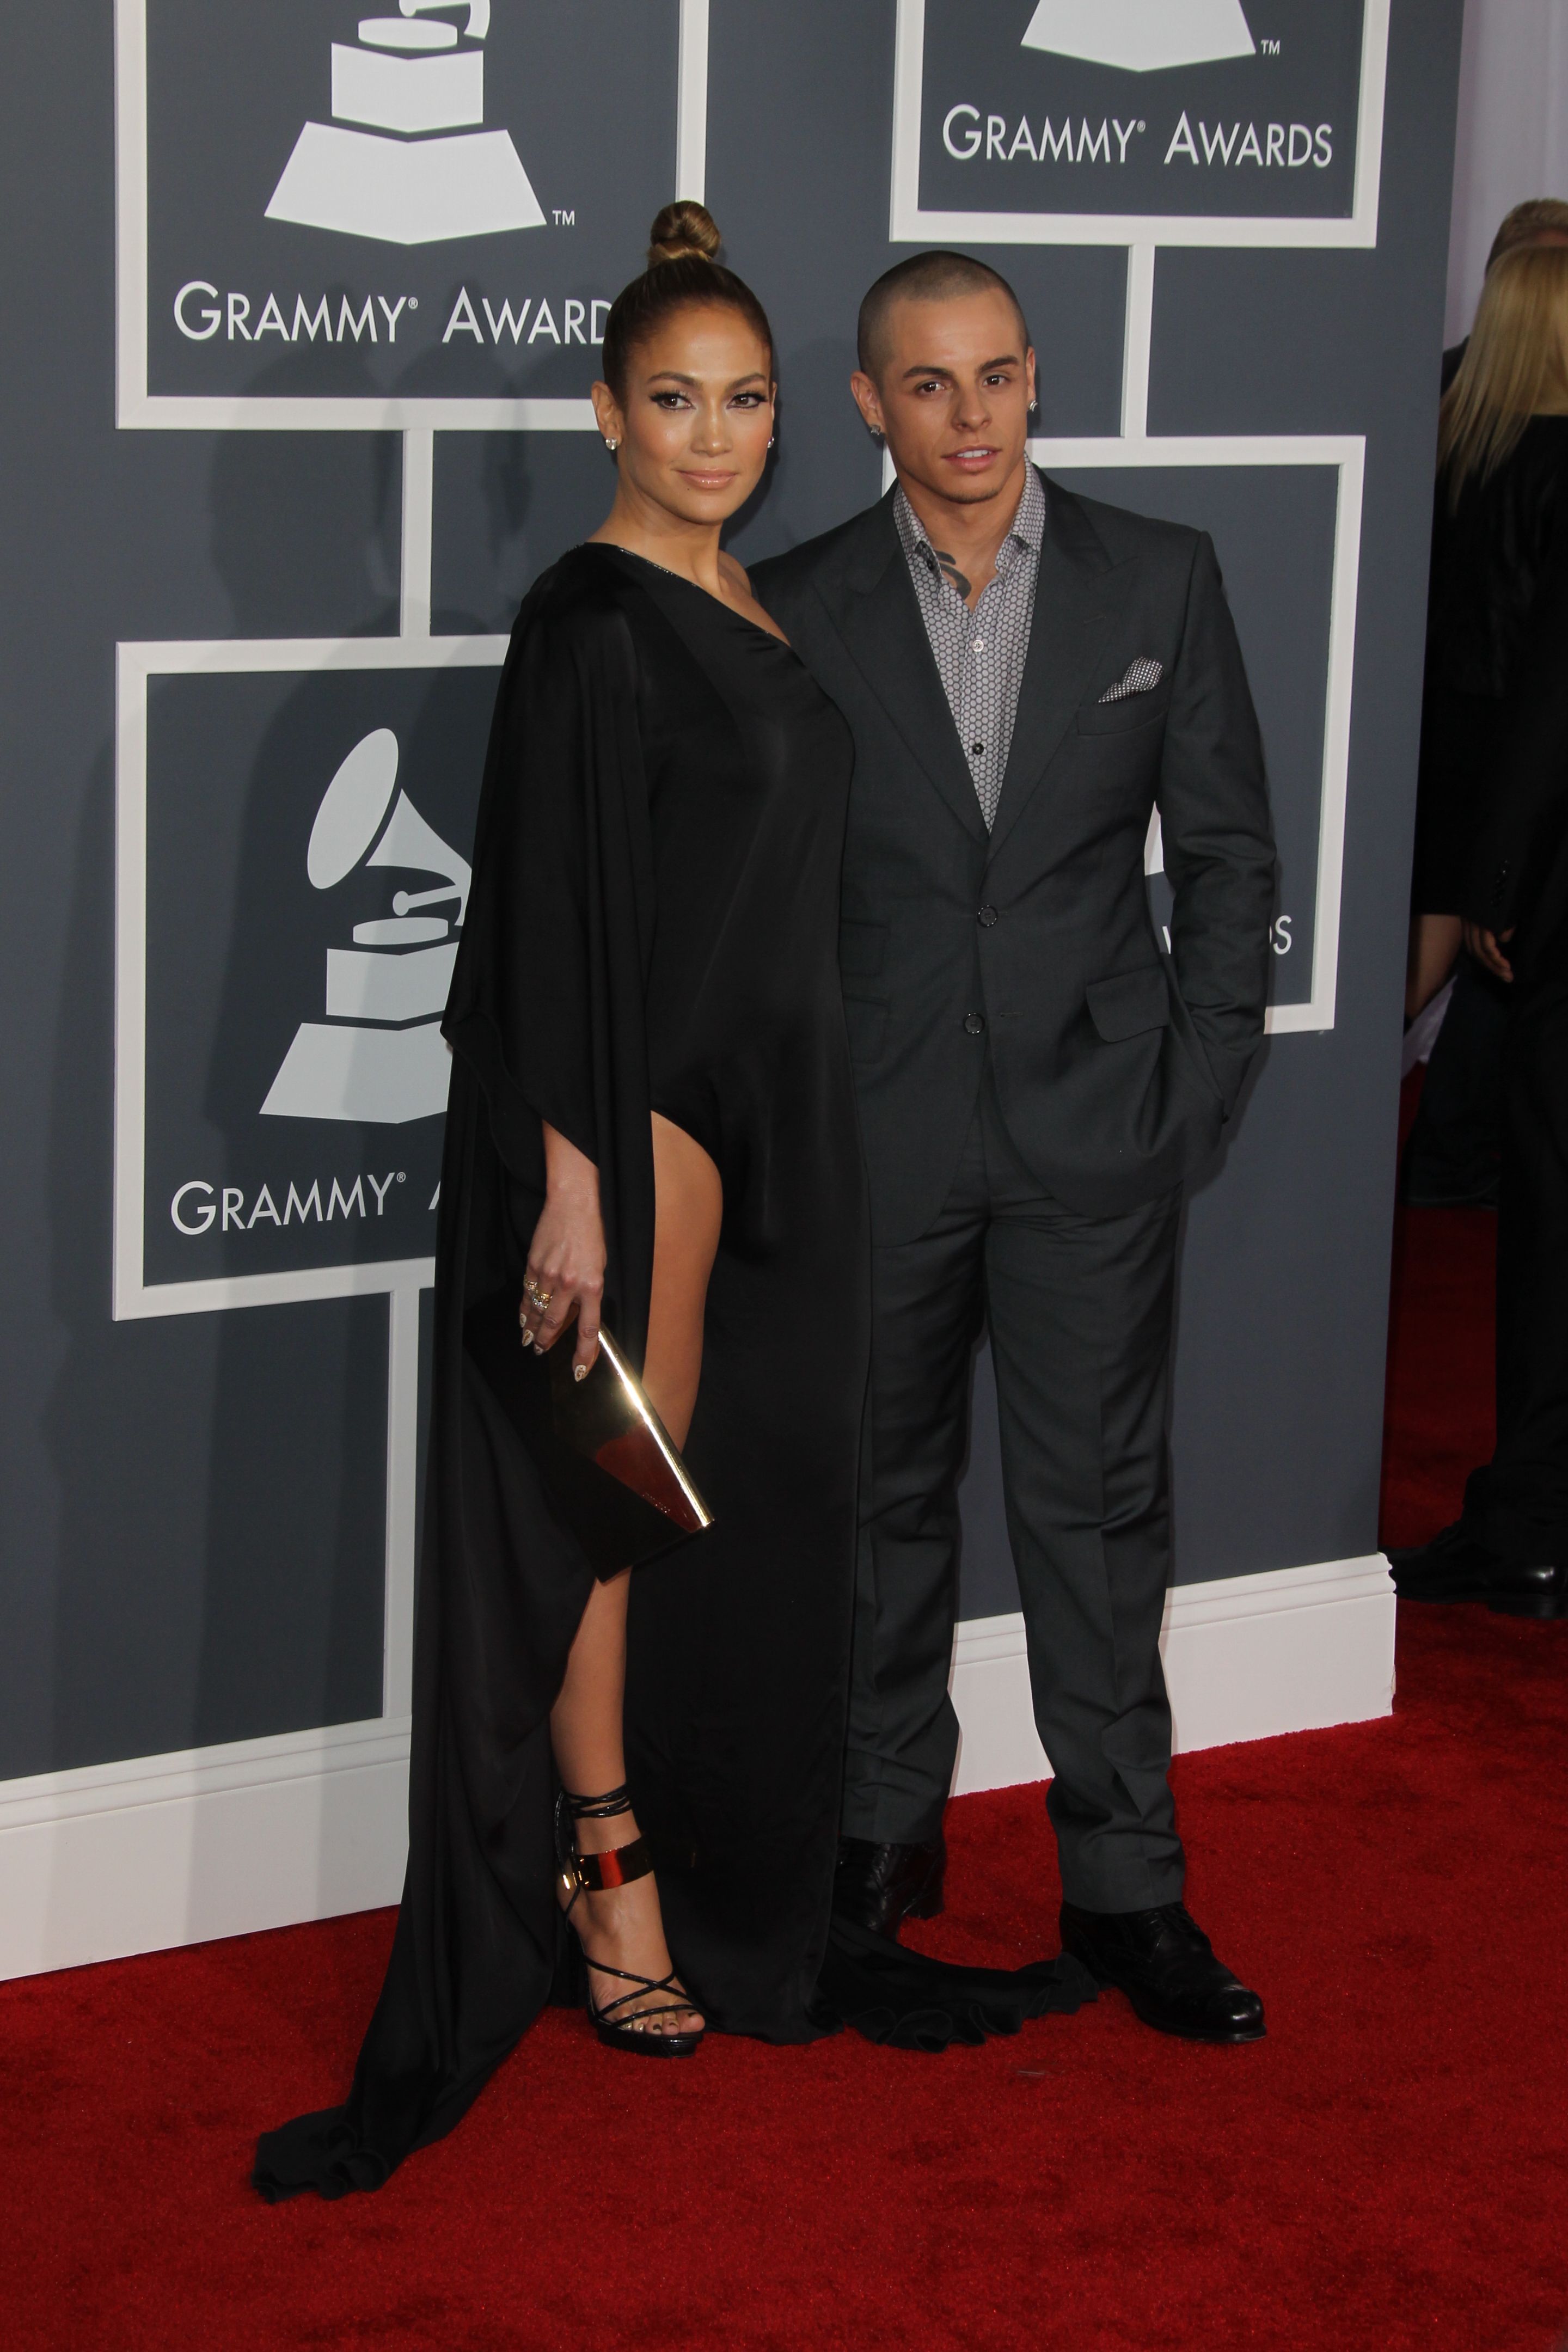  Jennifer Lopez and Casper Smart at the Grammy Awards | Source: Gettty Images